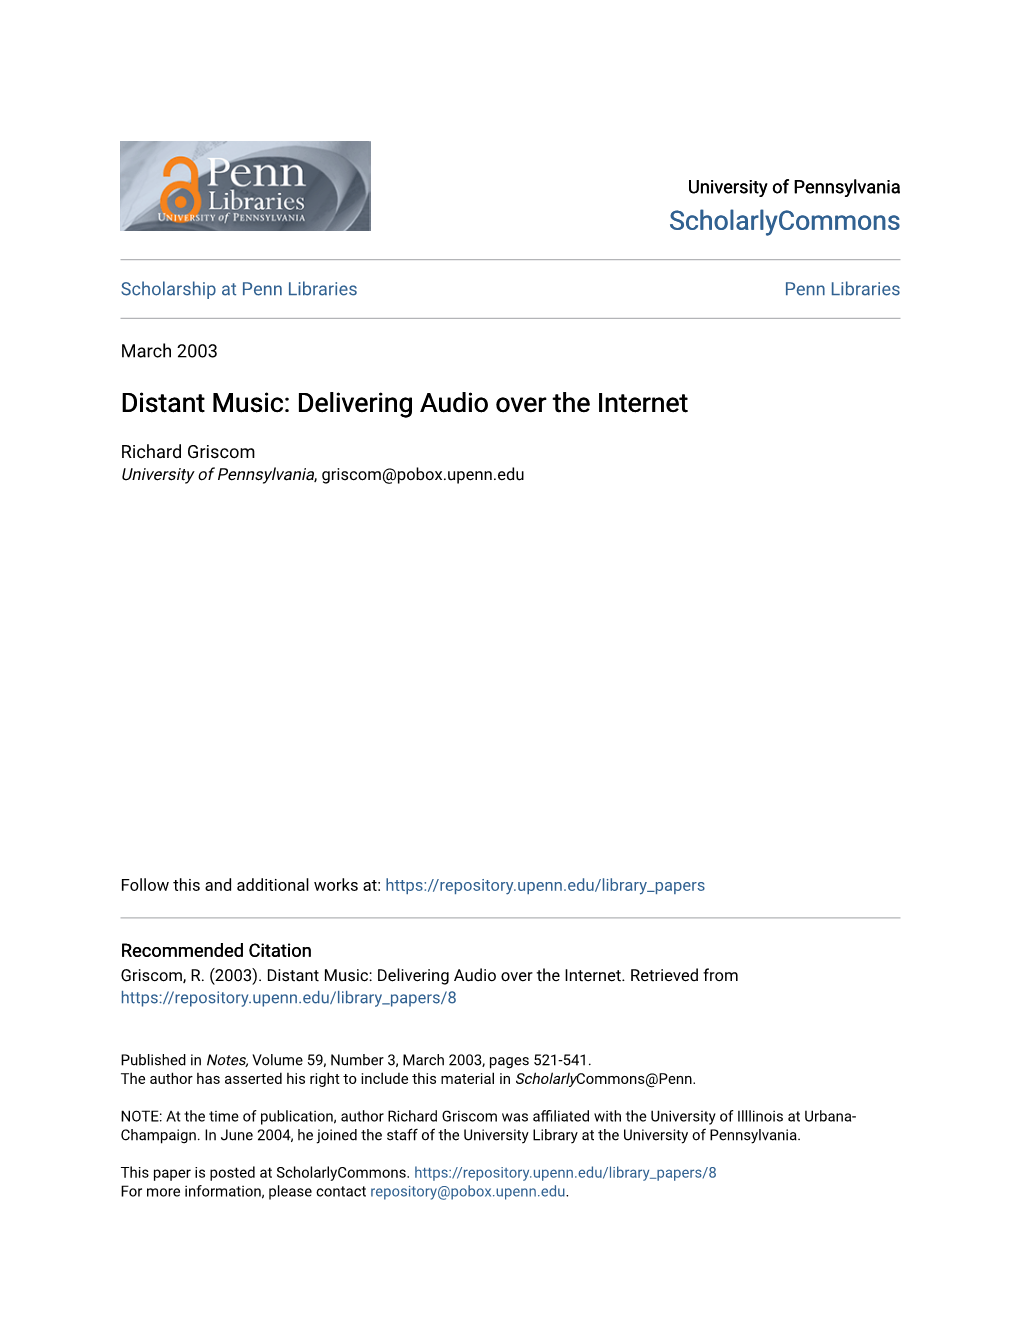 Distant Music: Delivering Audio Over the Internet